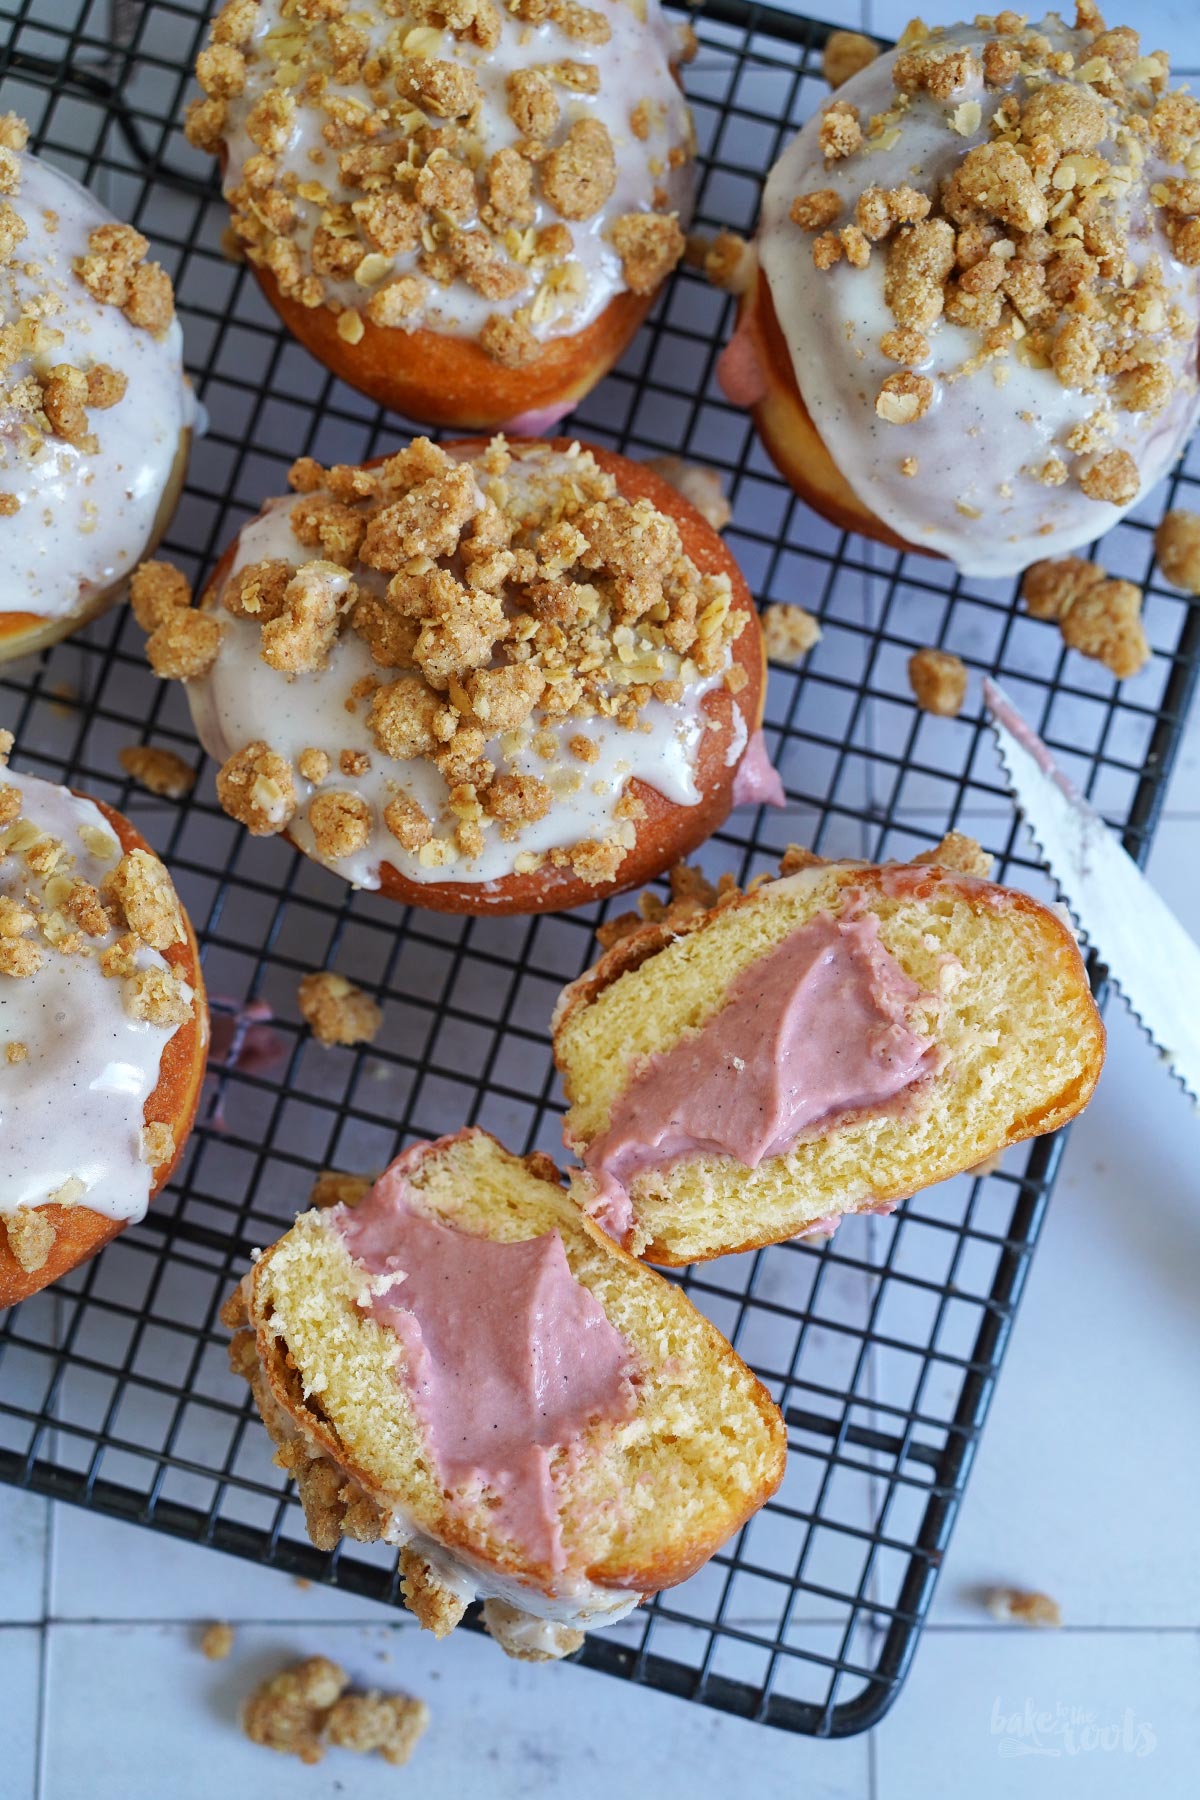 Rhabarber Streusel Donuts | Bake to the roots